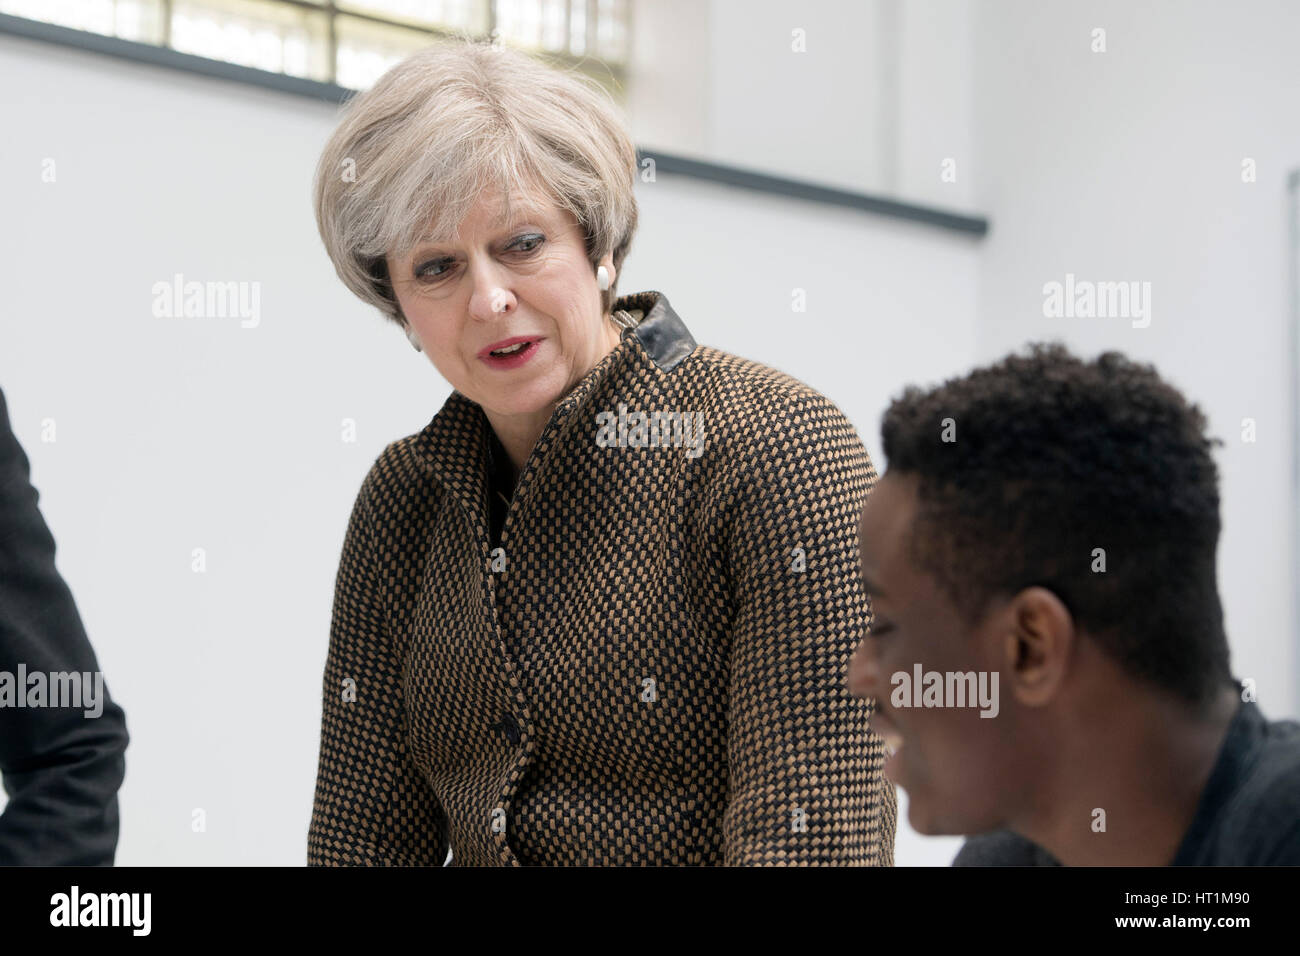 Prime Minister Theresa May talks with student Charles Kanda in a mathematics class during a visit to King's College London Mathematics School in central London as more than half a billion pounds is to be pumped into creating new free schools, including grammars, and refurbishing existing school buildings, the Government has said. Stock Photo